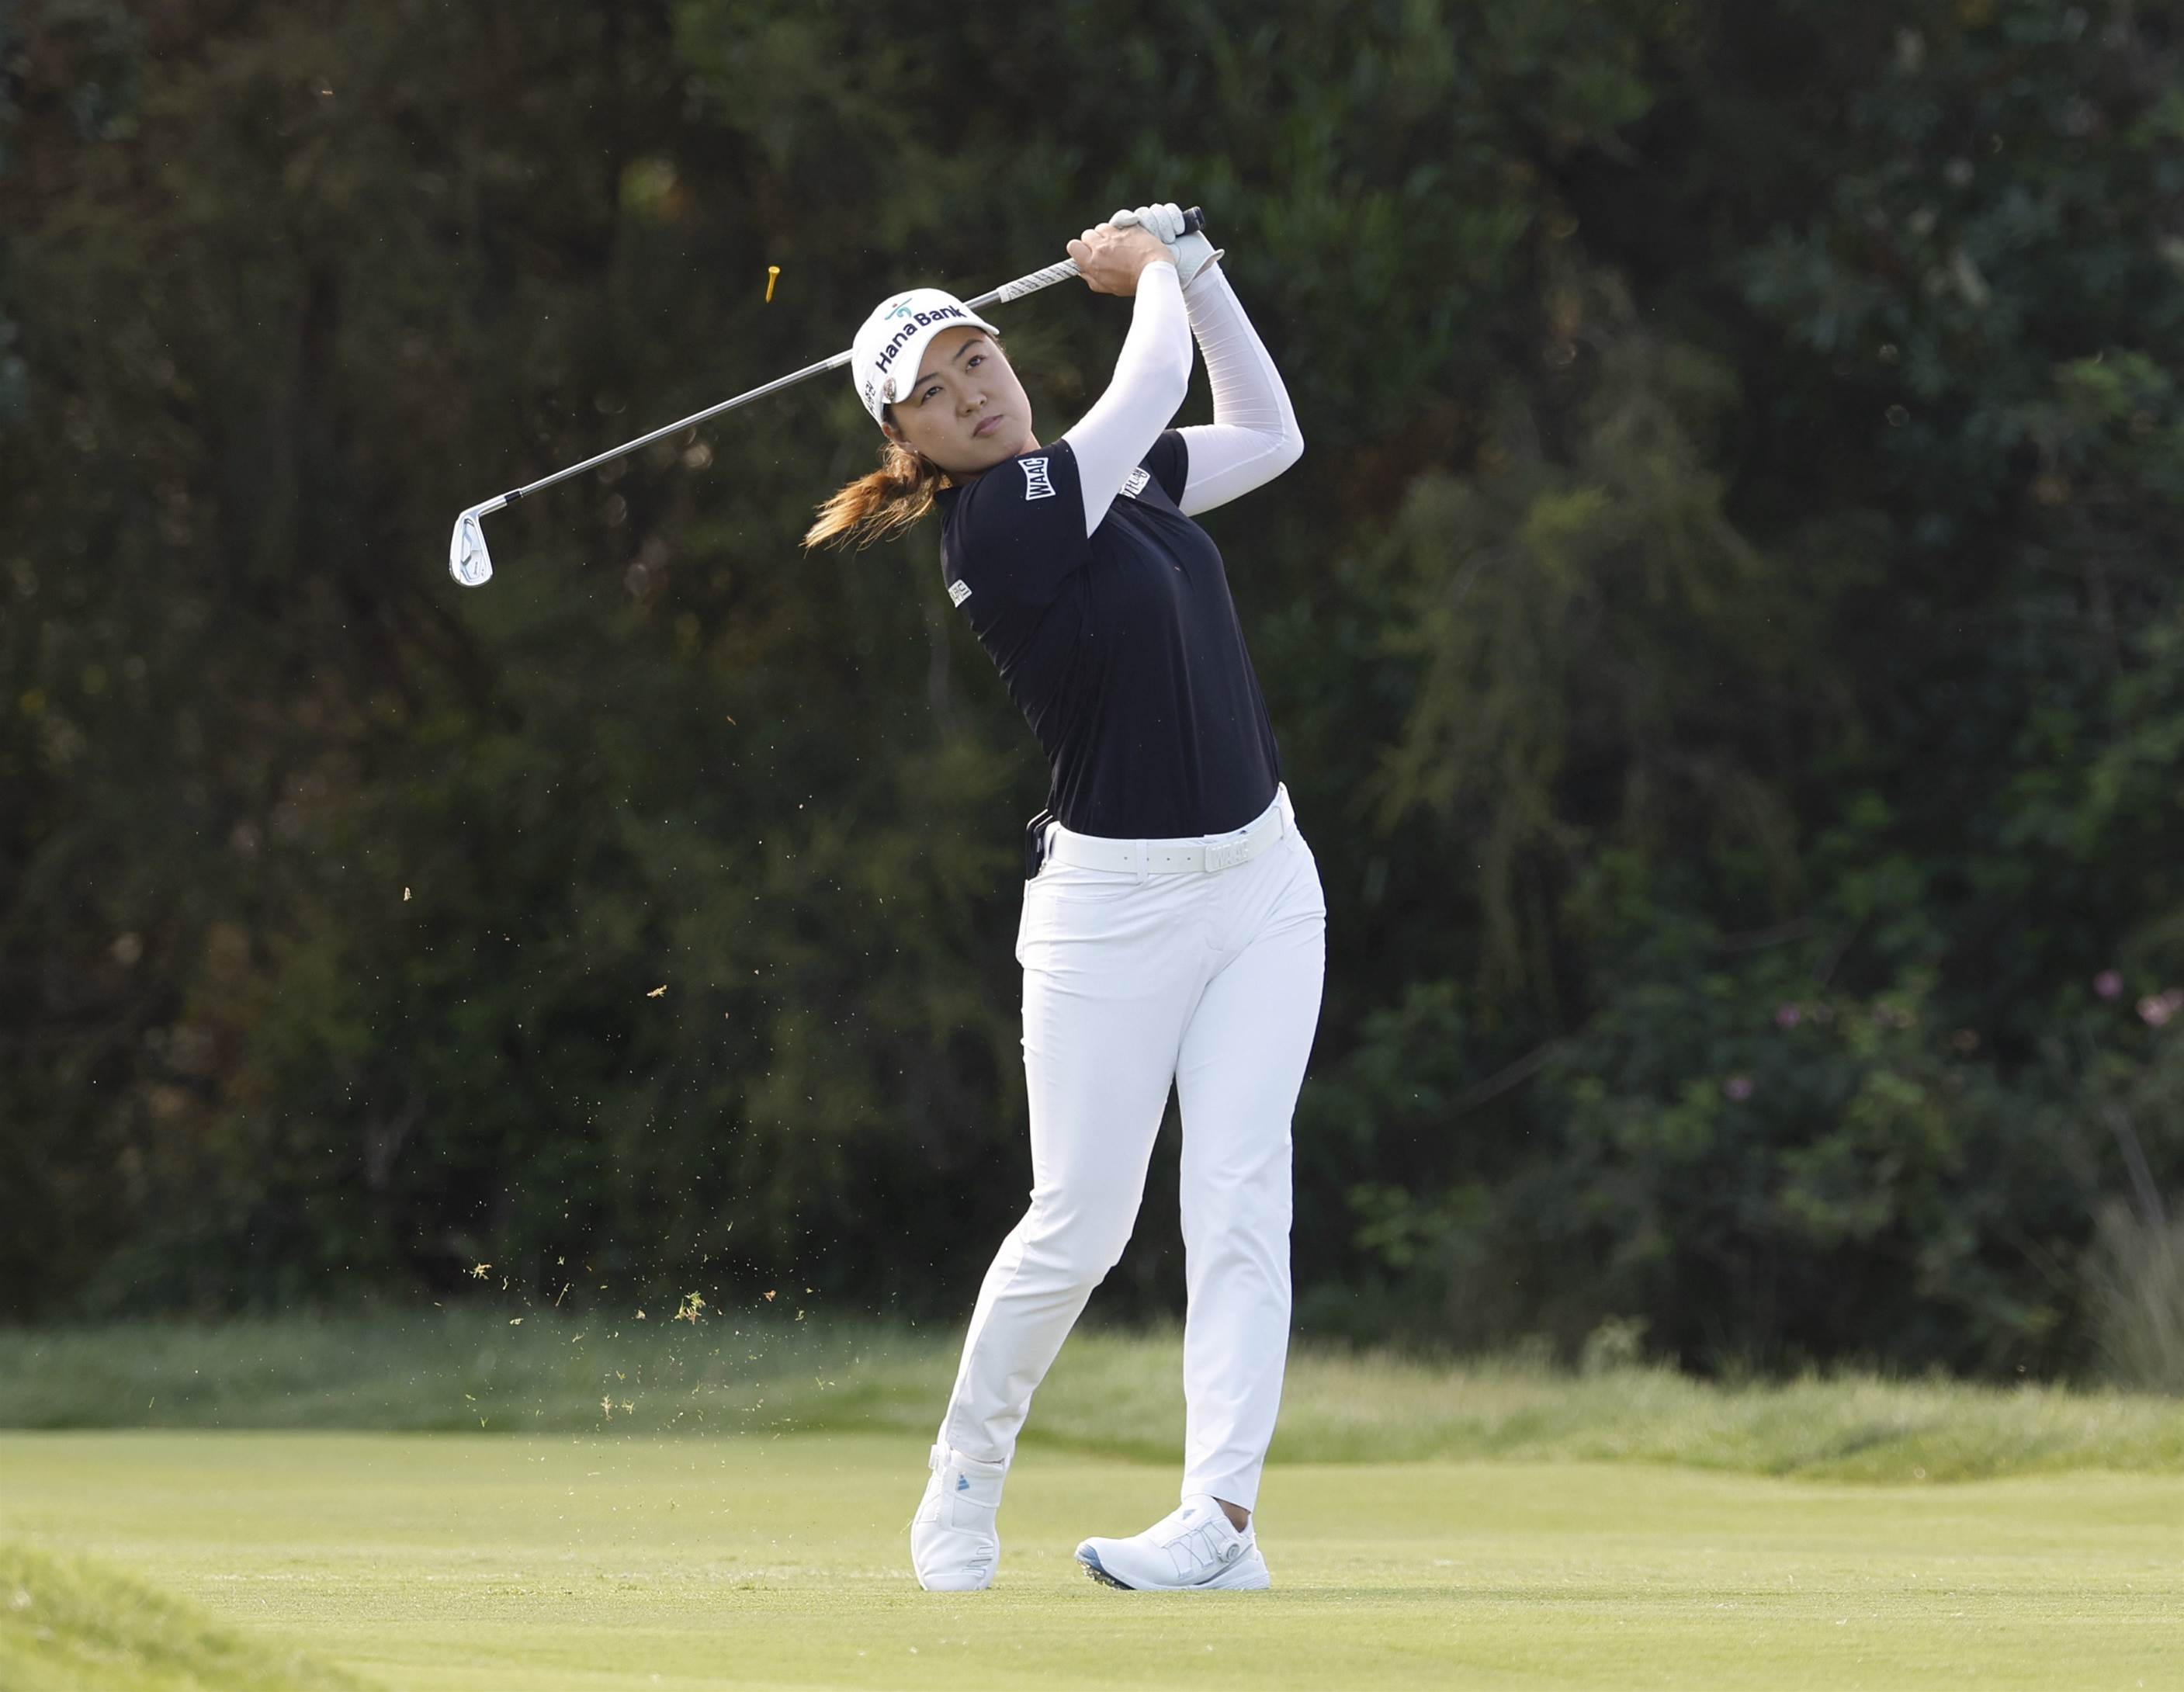 Here she comes: two-time major champion Minjee Lee in thrilling late ...